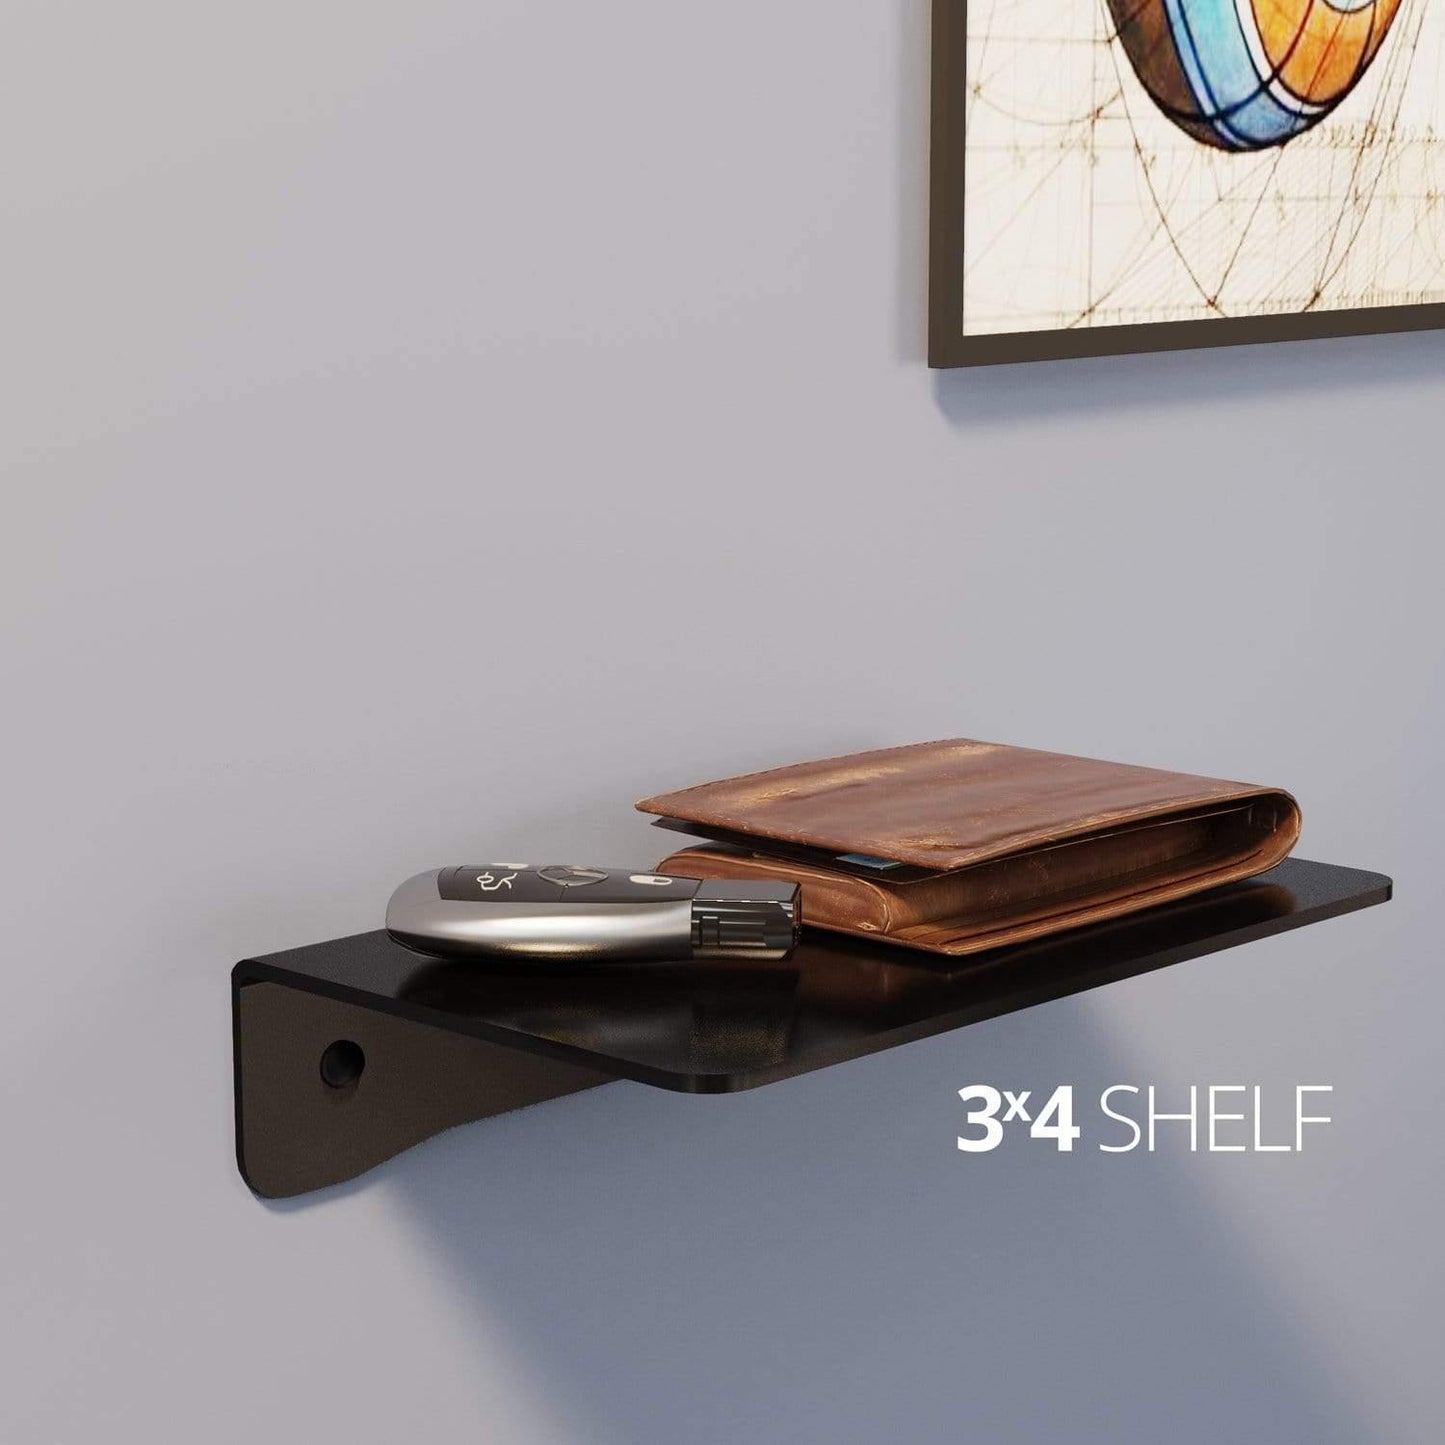 Small wall mounted shelf for home, office and garage - 3x4 shelf in use in room